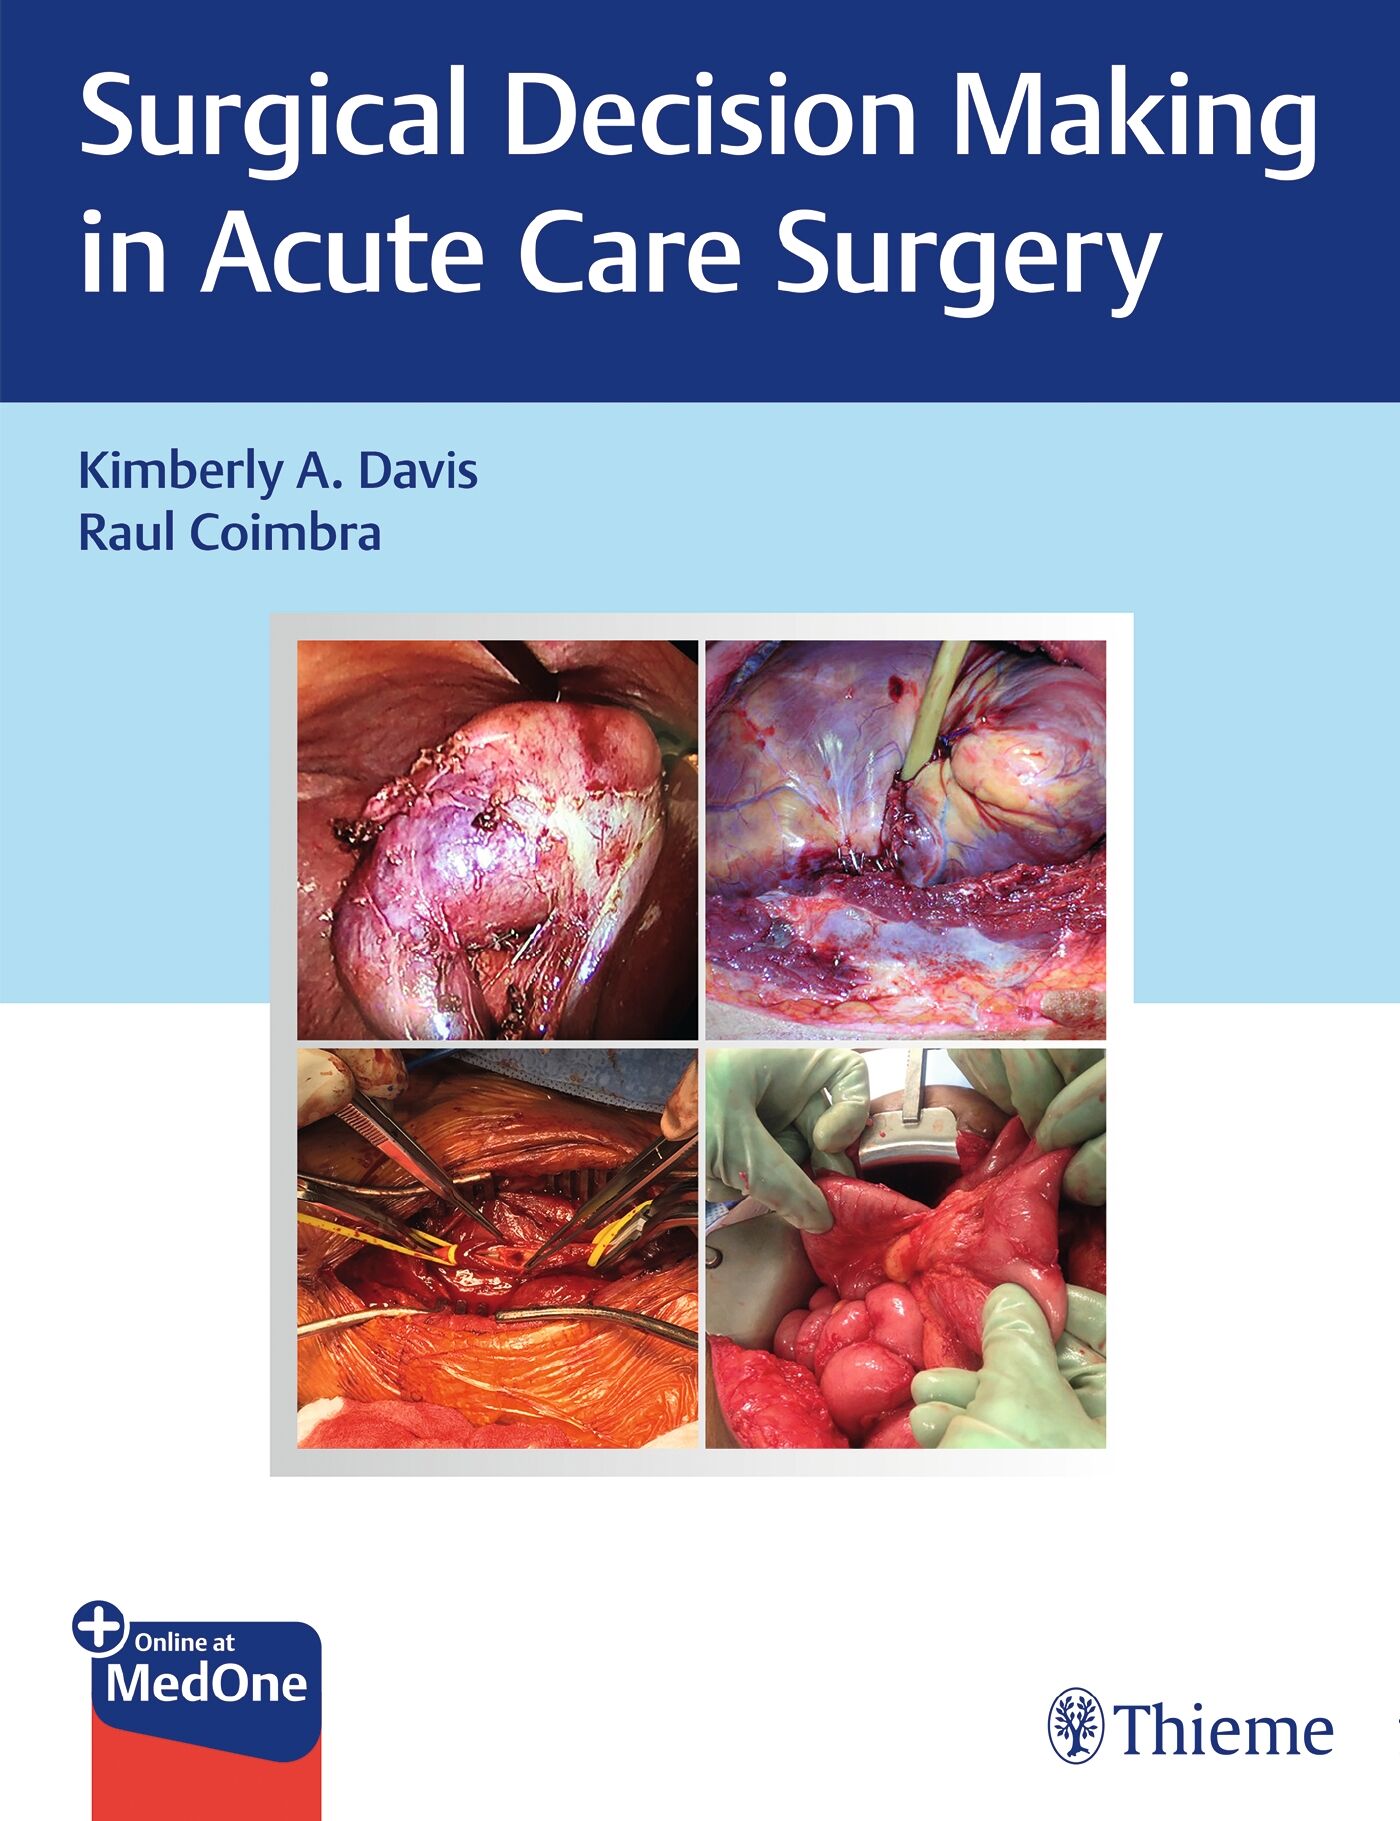 Surgical Decision Making in Acute Care Surgery, 9781684200580